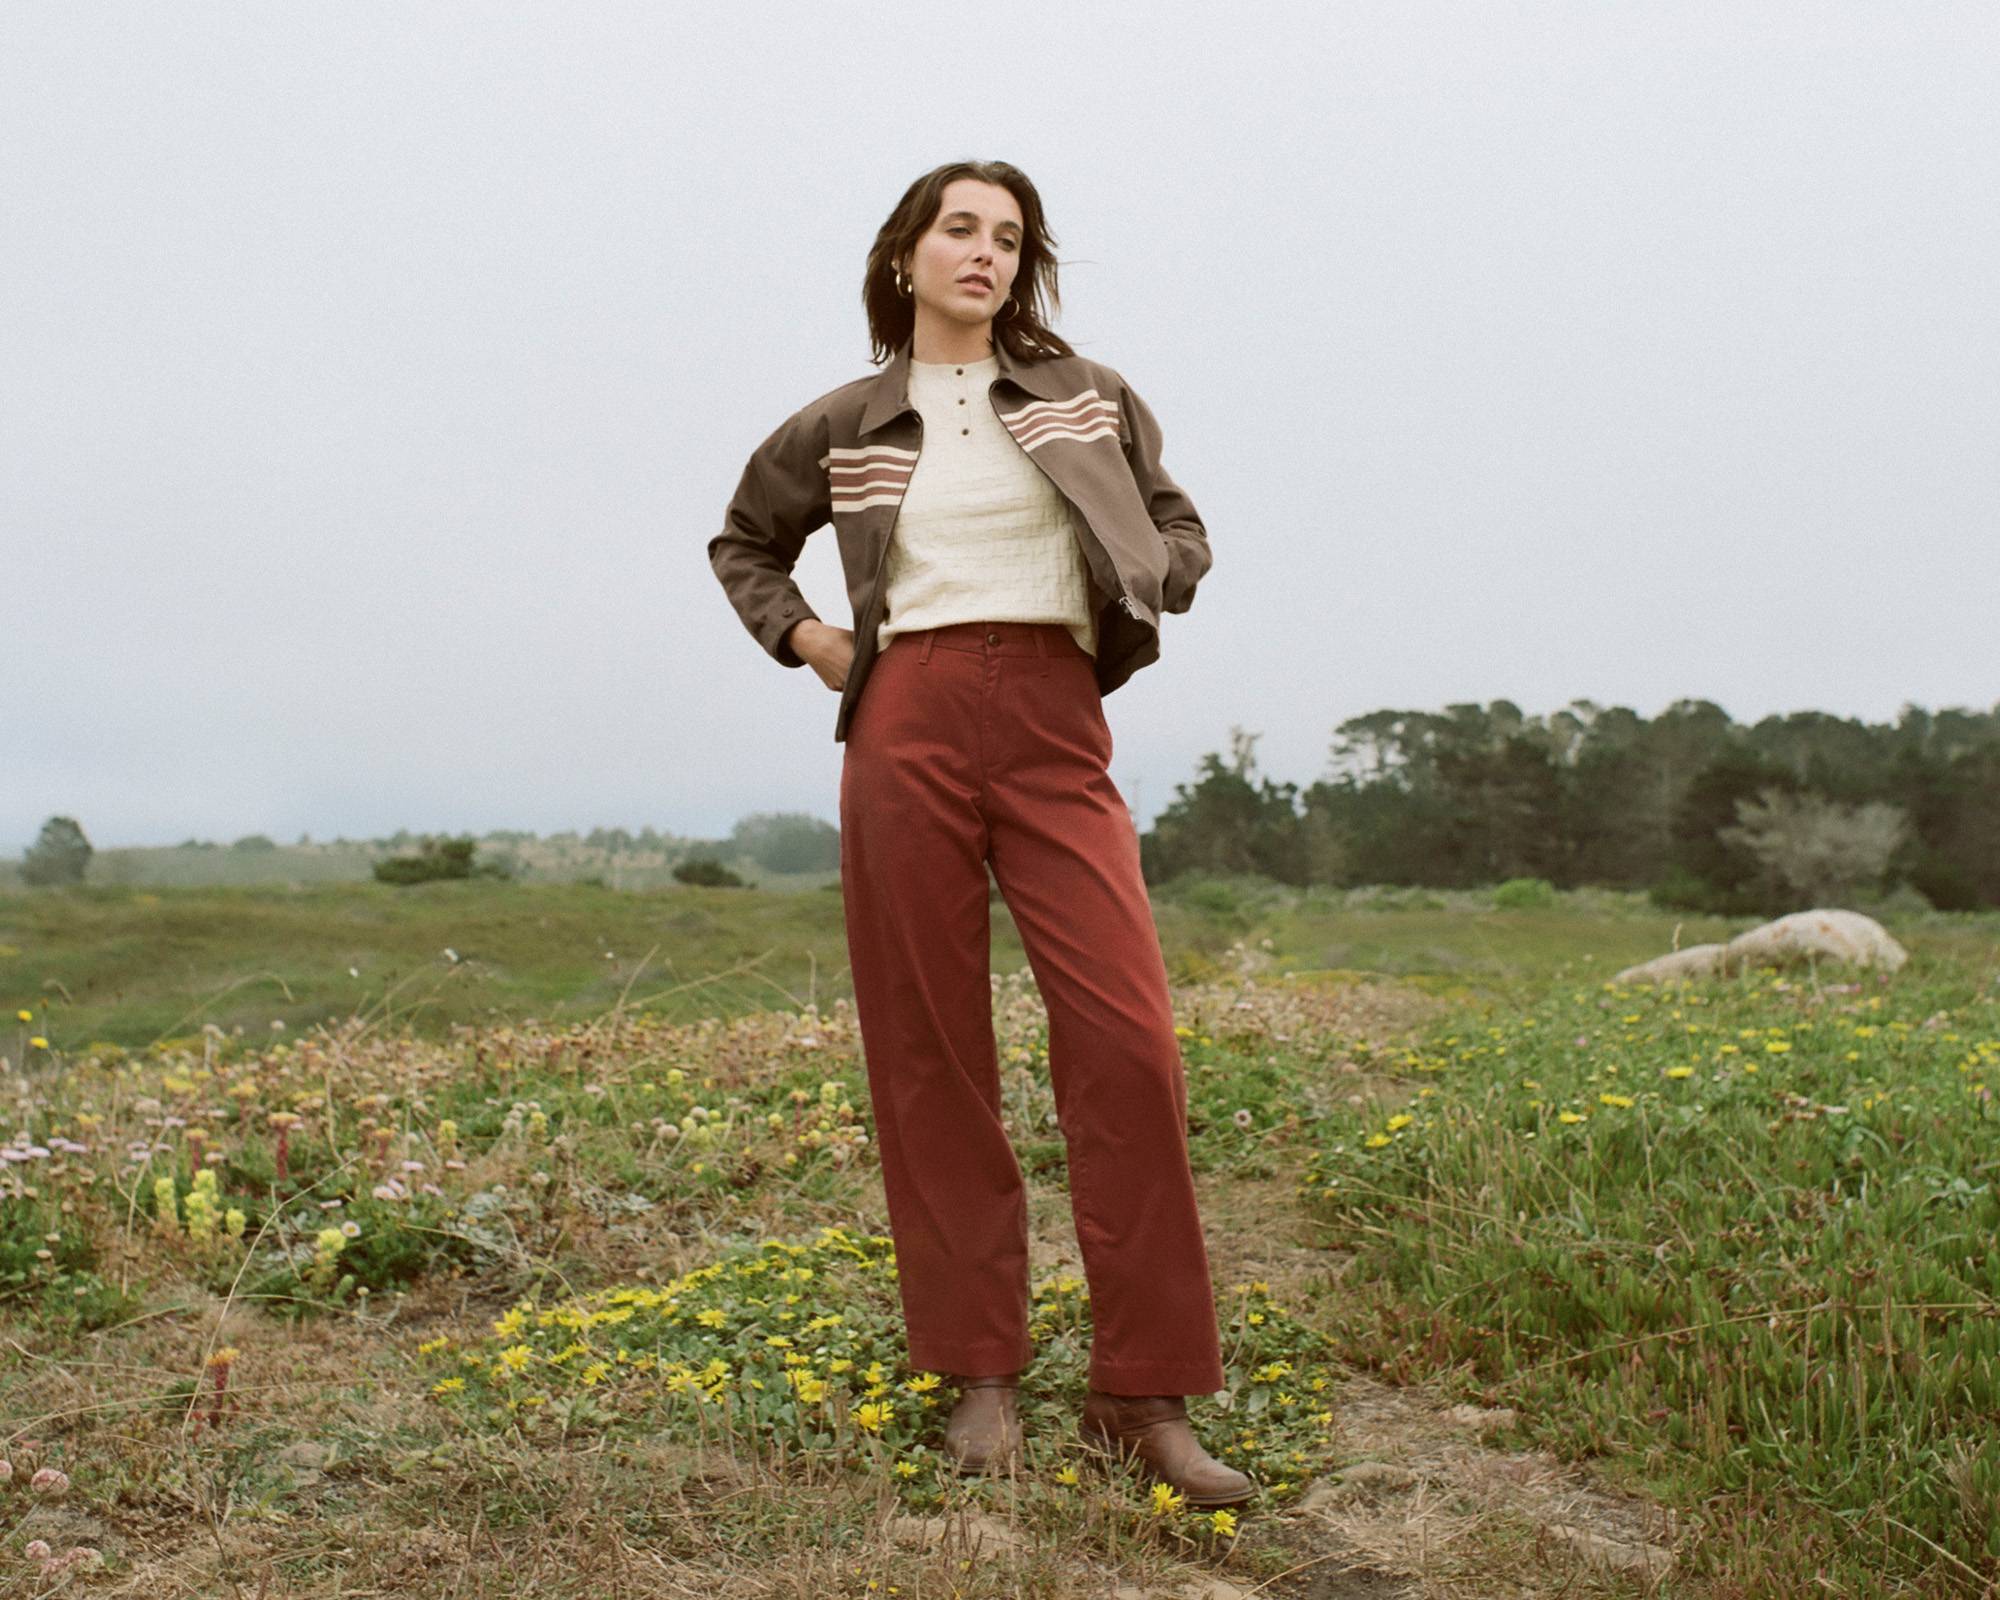 Images of woman wearing Levi's® clothing and posing in Northern California nature setting